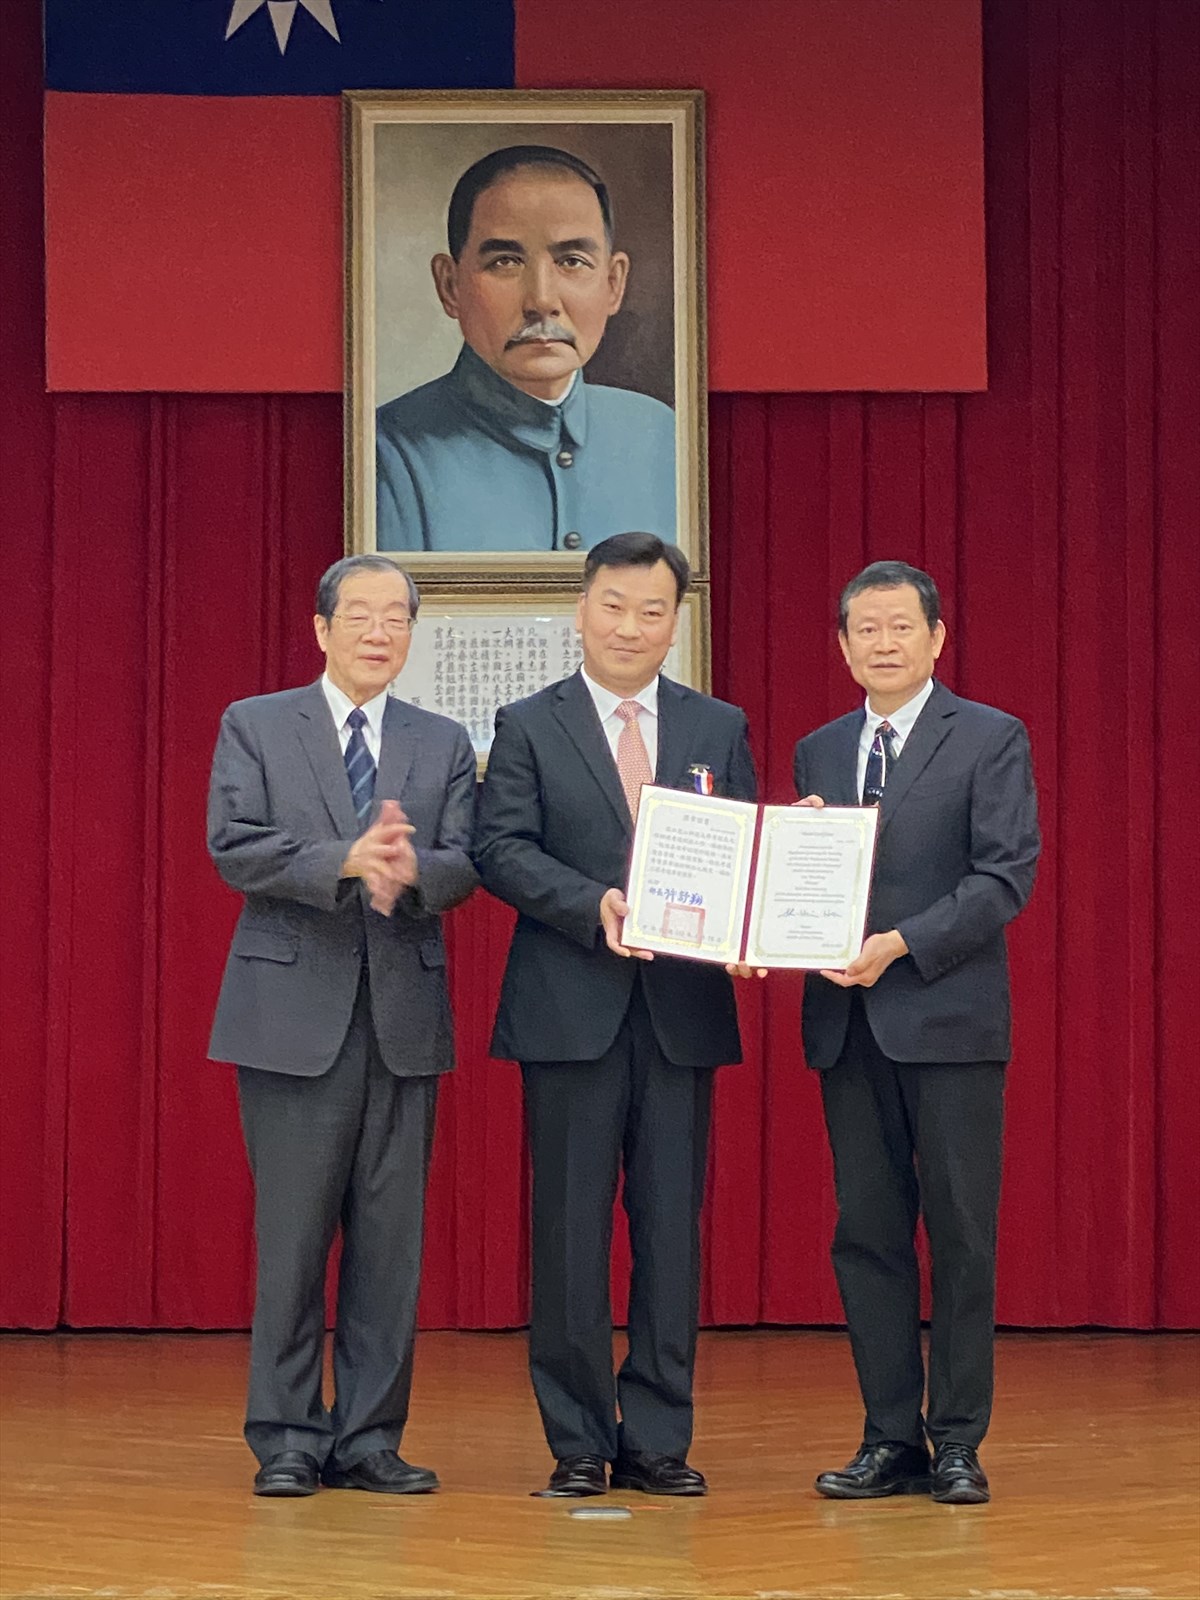 01.KSU Conducts National Examination Services for Over 10 Years: President Lee Tien-Shiang Awarded Third-Class Medal for Supervisory Dedication